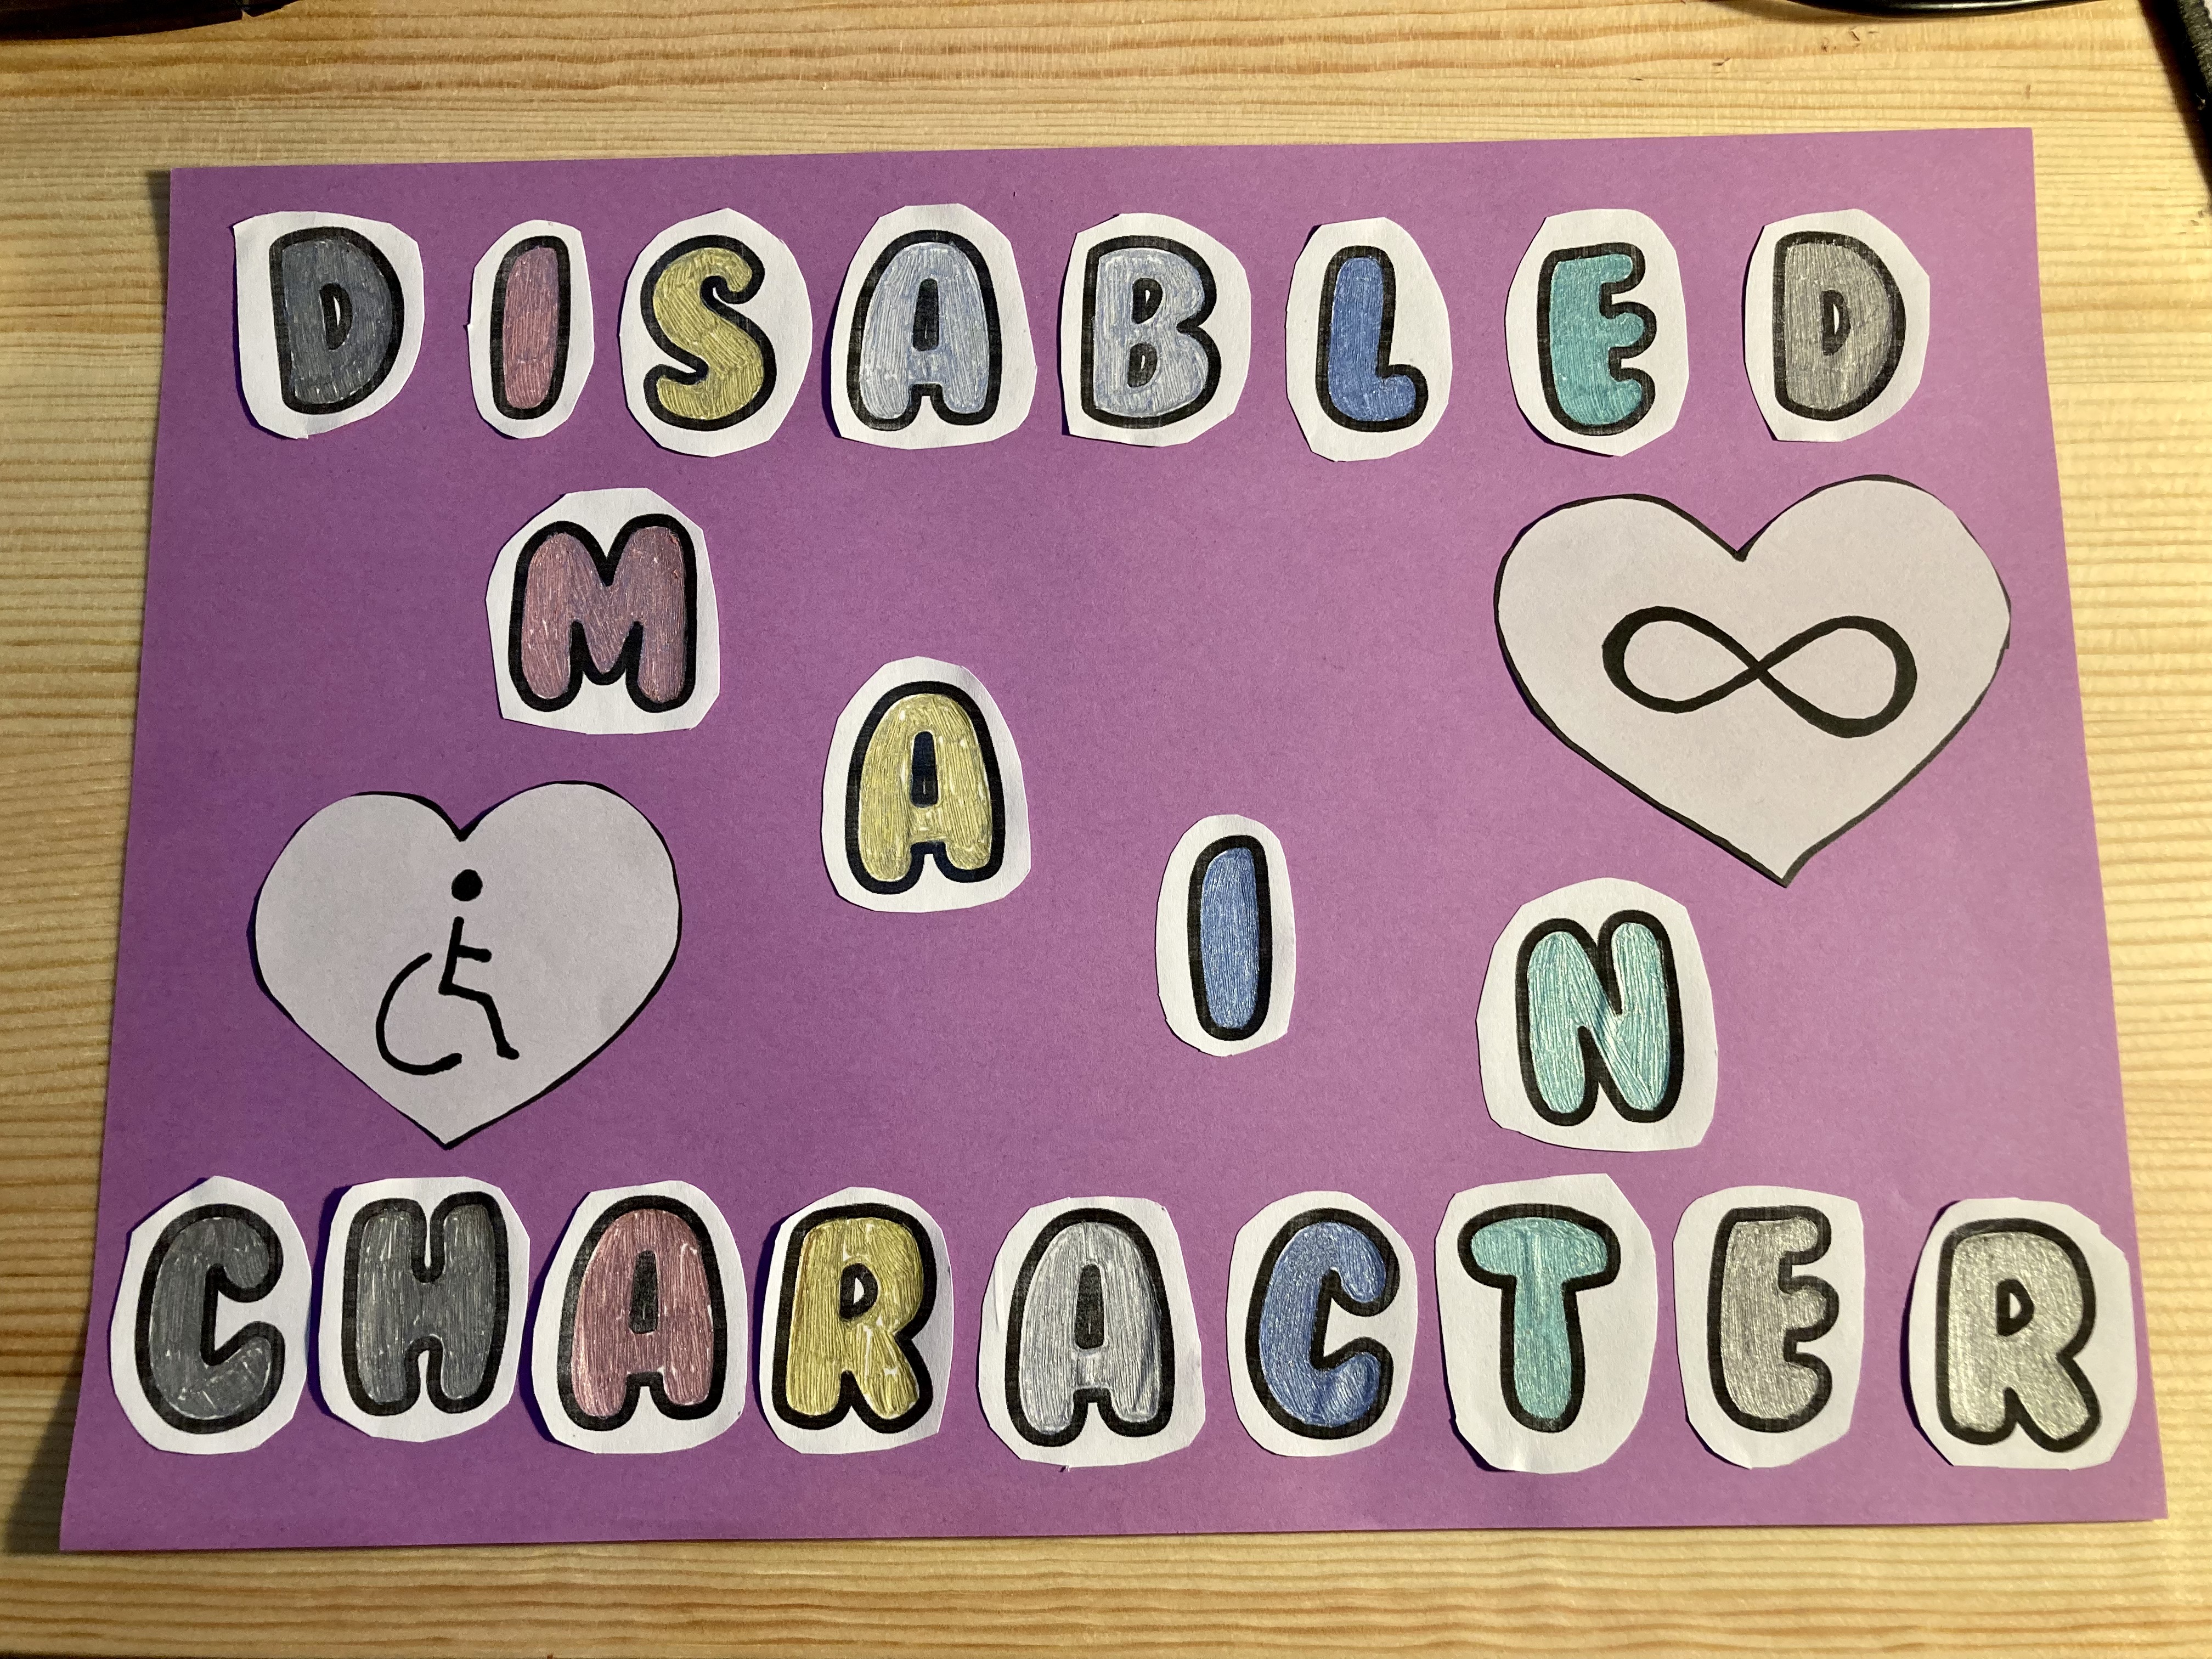 A purple background with the words Disabled Main Character stuck on, along with hearts containing the wheelchair symbol and the infinity symbol.